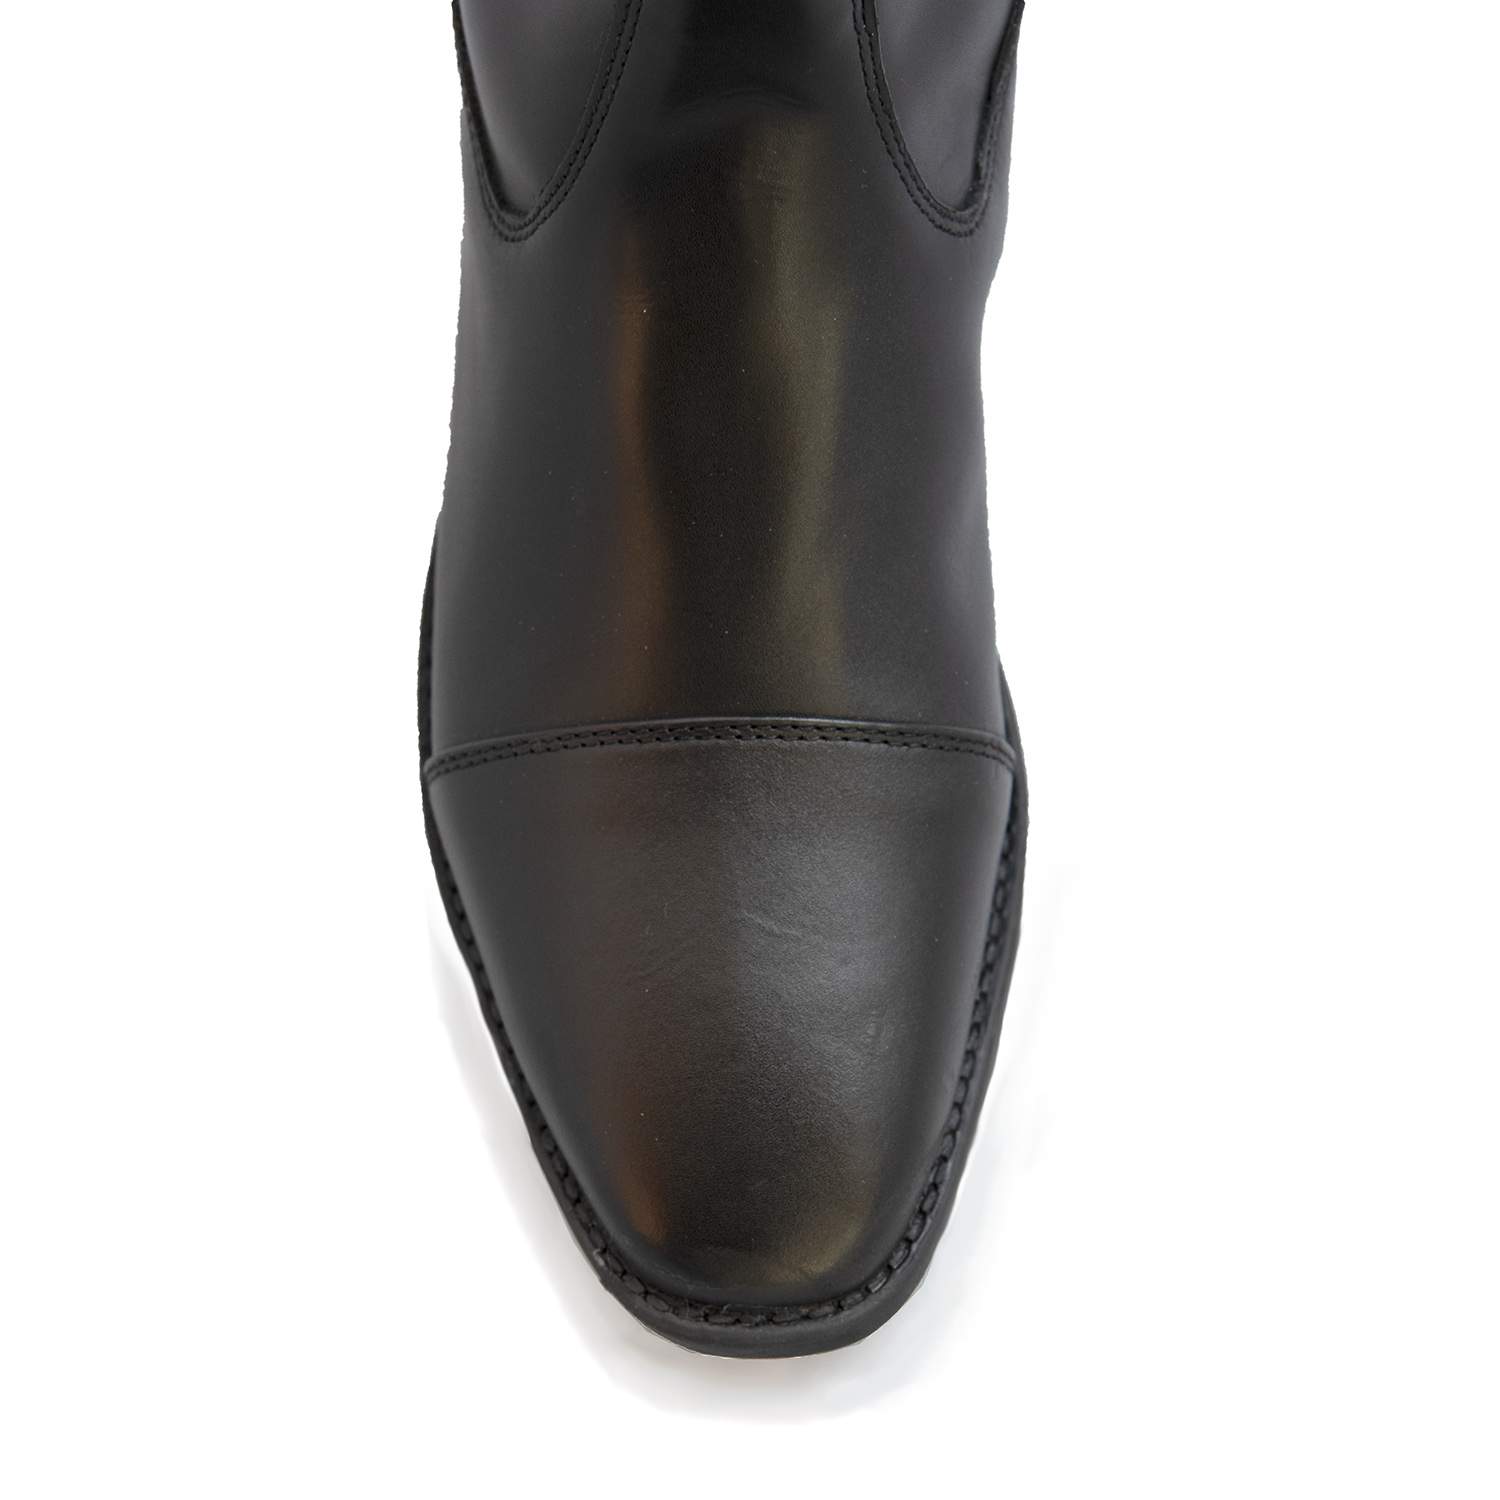 The Keira Dress Boot